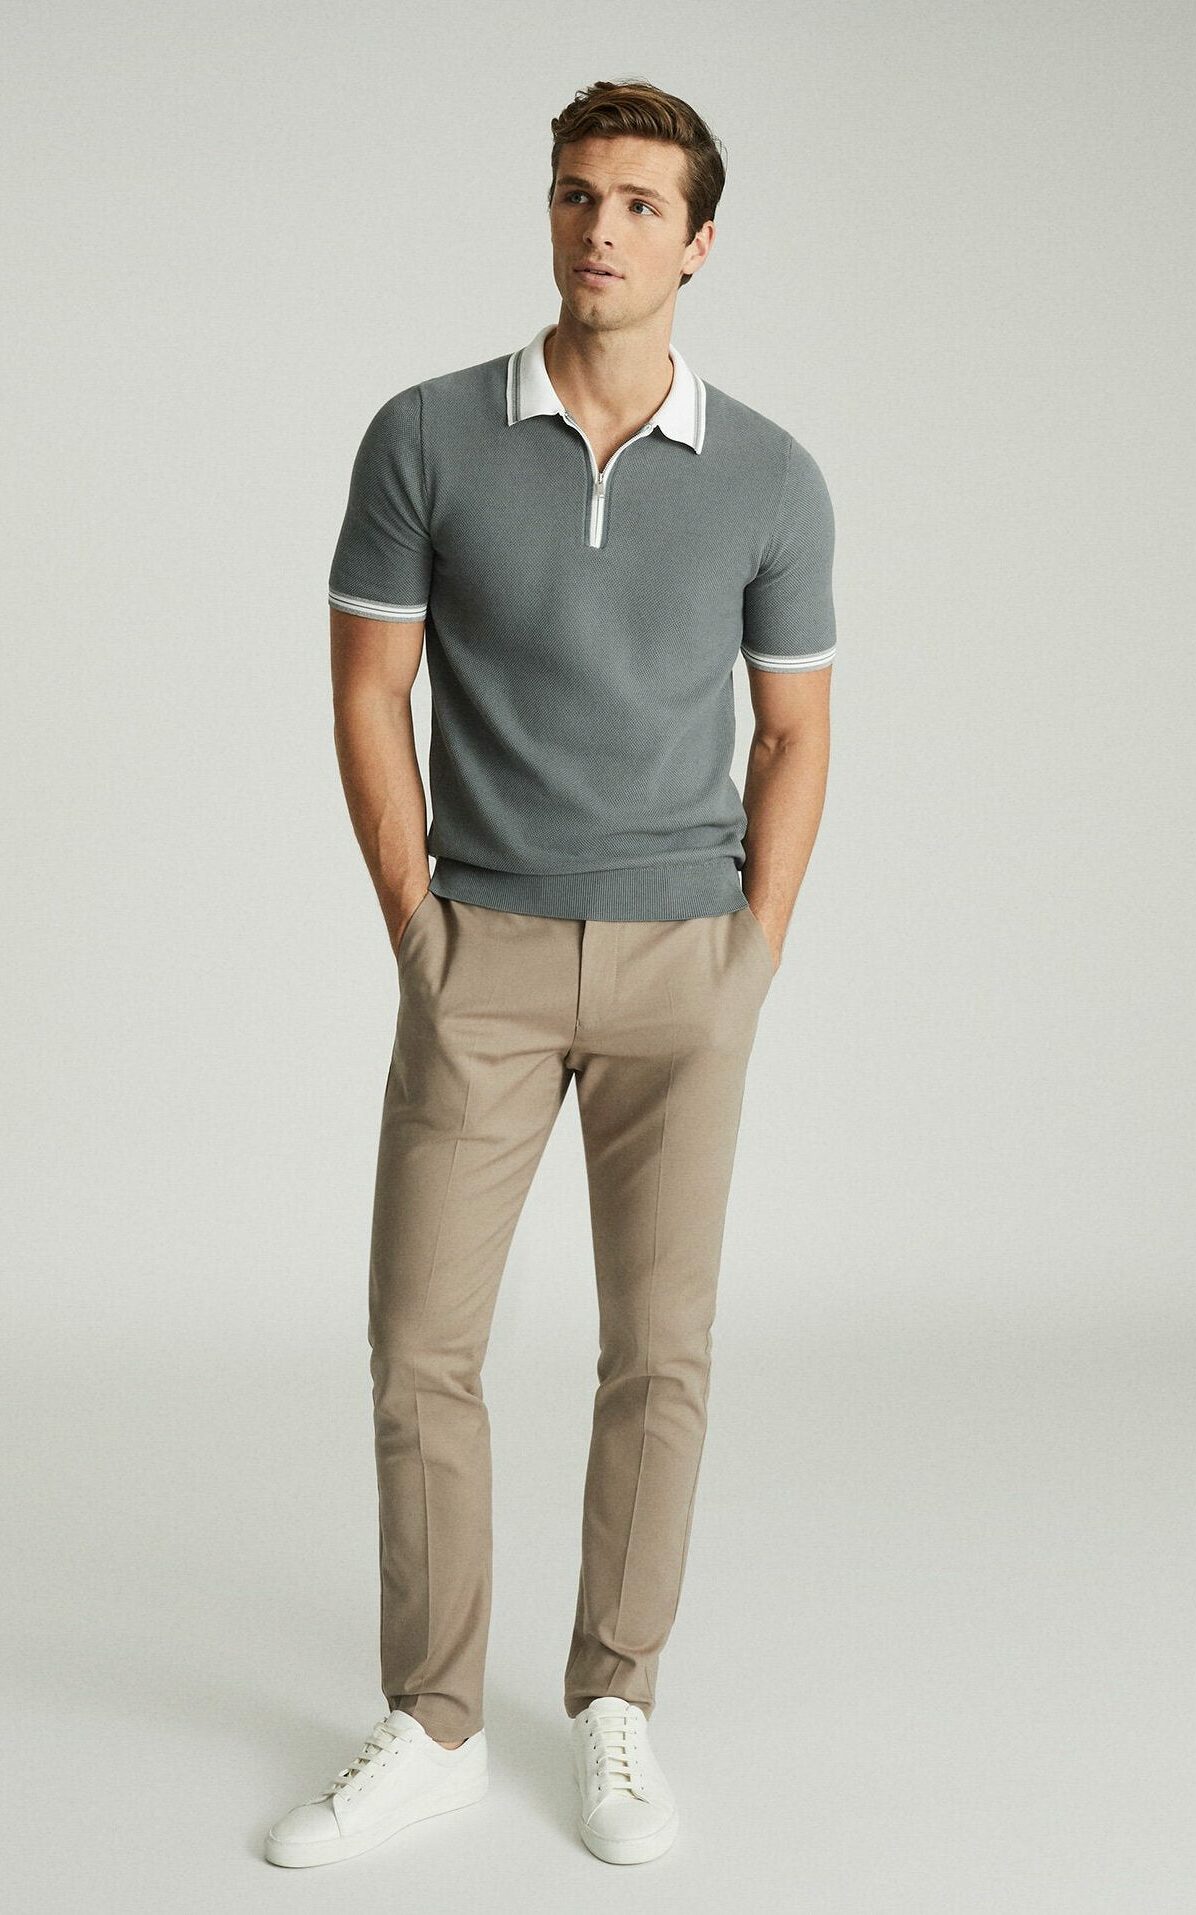 21 Best Polo Brands – Where to Buy Comfortable, Stylish Polos